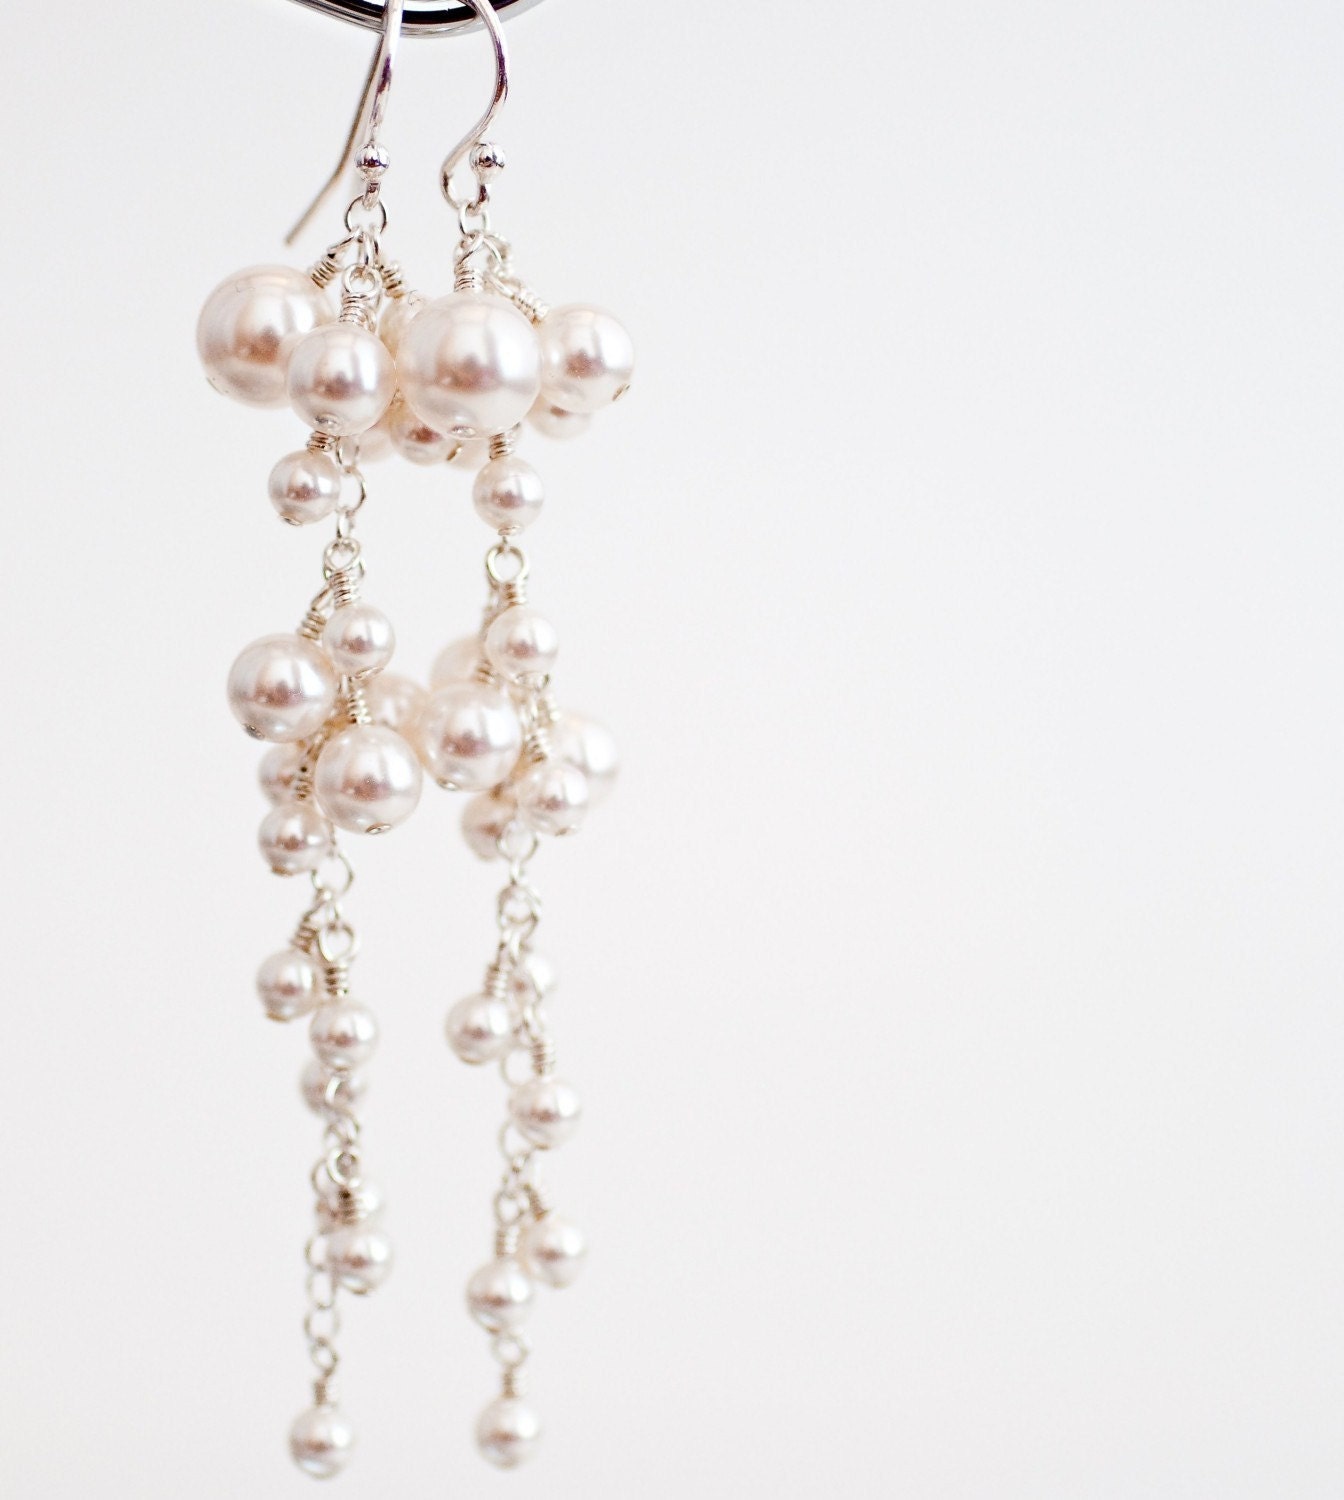 Earrings, Bridal Wedding. Elegant and Glamorous Long Drop Cluster Dangle Winter White Pearl and Sterling Silver Statement Beaded Glamour Custom Handmade Jewellery for the Bride or your Bridesmaids